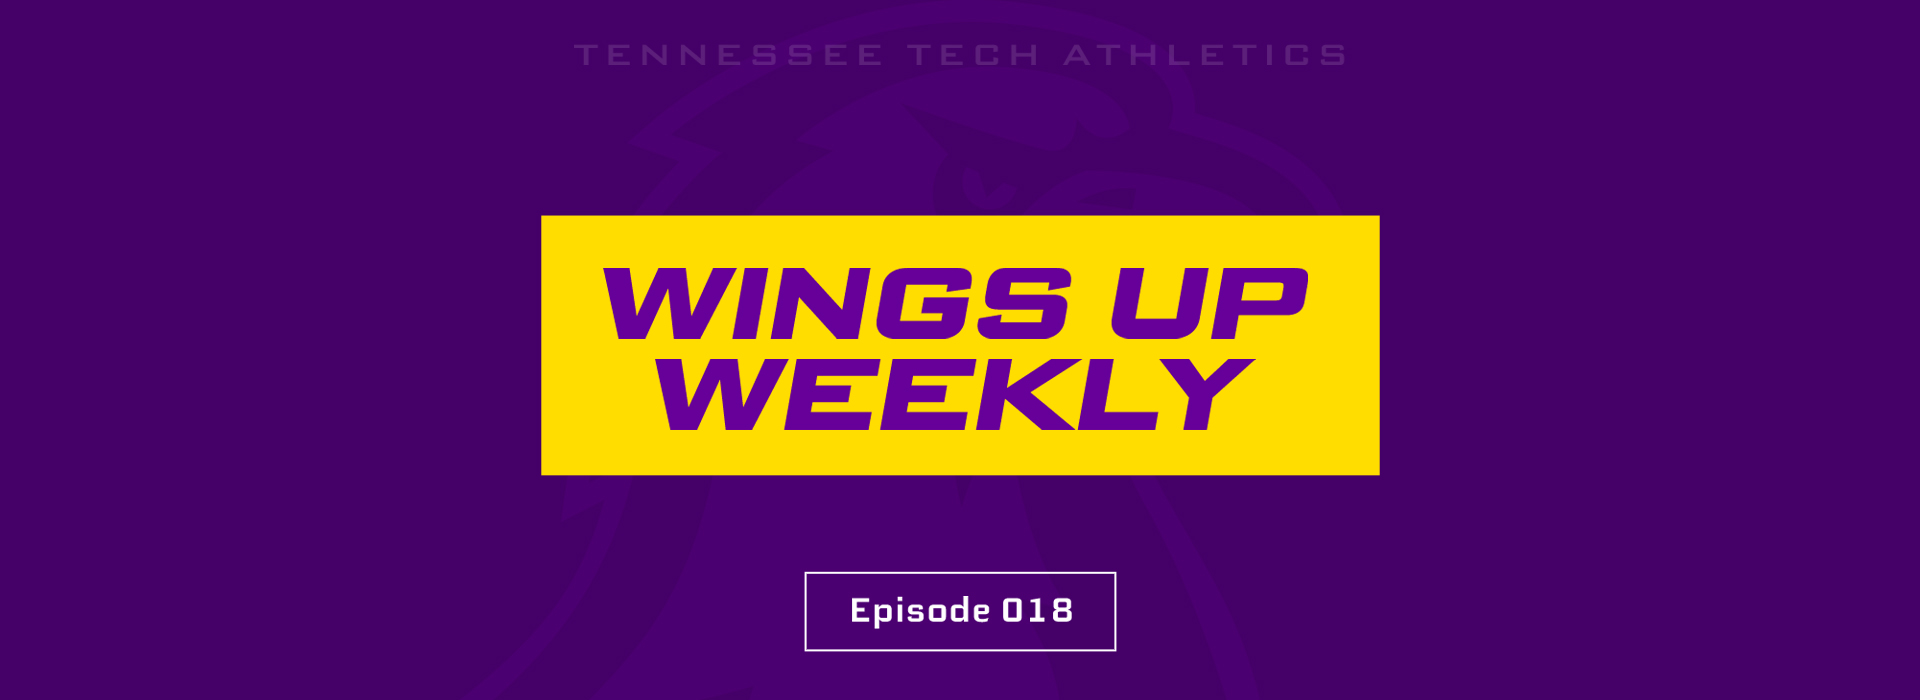 Wings Up Weekly: Episode 018 - featuring Tech radio broadcaster Roger Ealey